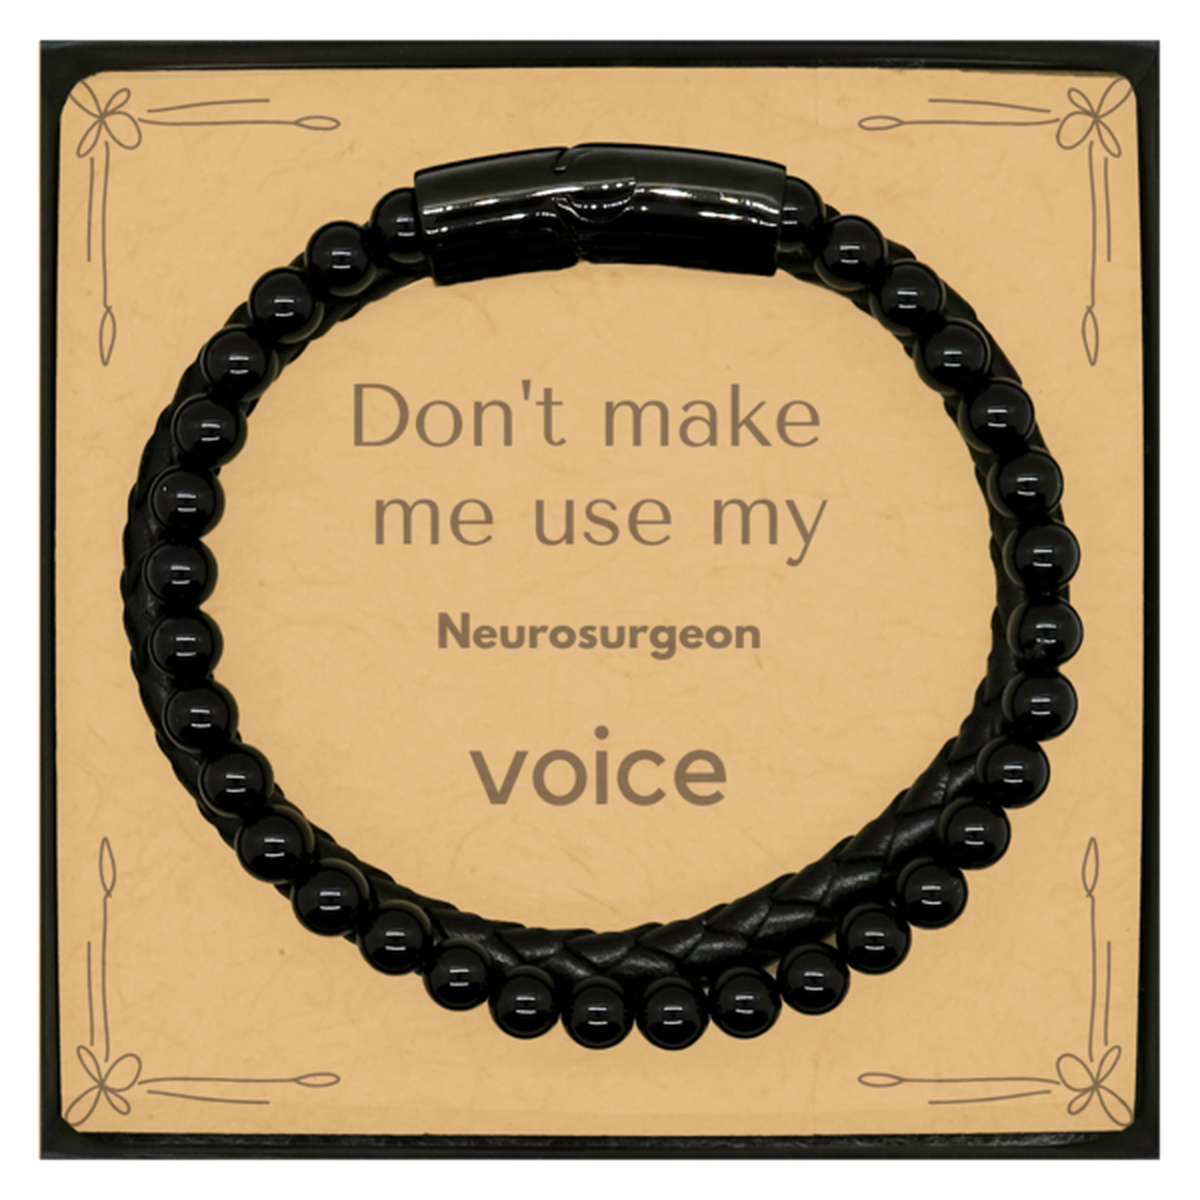 Don't make me use my Neurosurgeon voice, Sarcasm Neurosurgeon Card Gifts, Christmas Neurosurgeon Stone Leather Bracelets Birthday Unique Gifts For Neurosurgeon Coworkers, Men, Women, Colleague, Friends